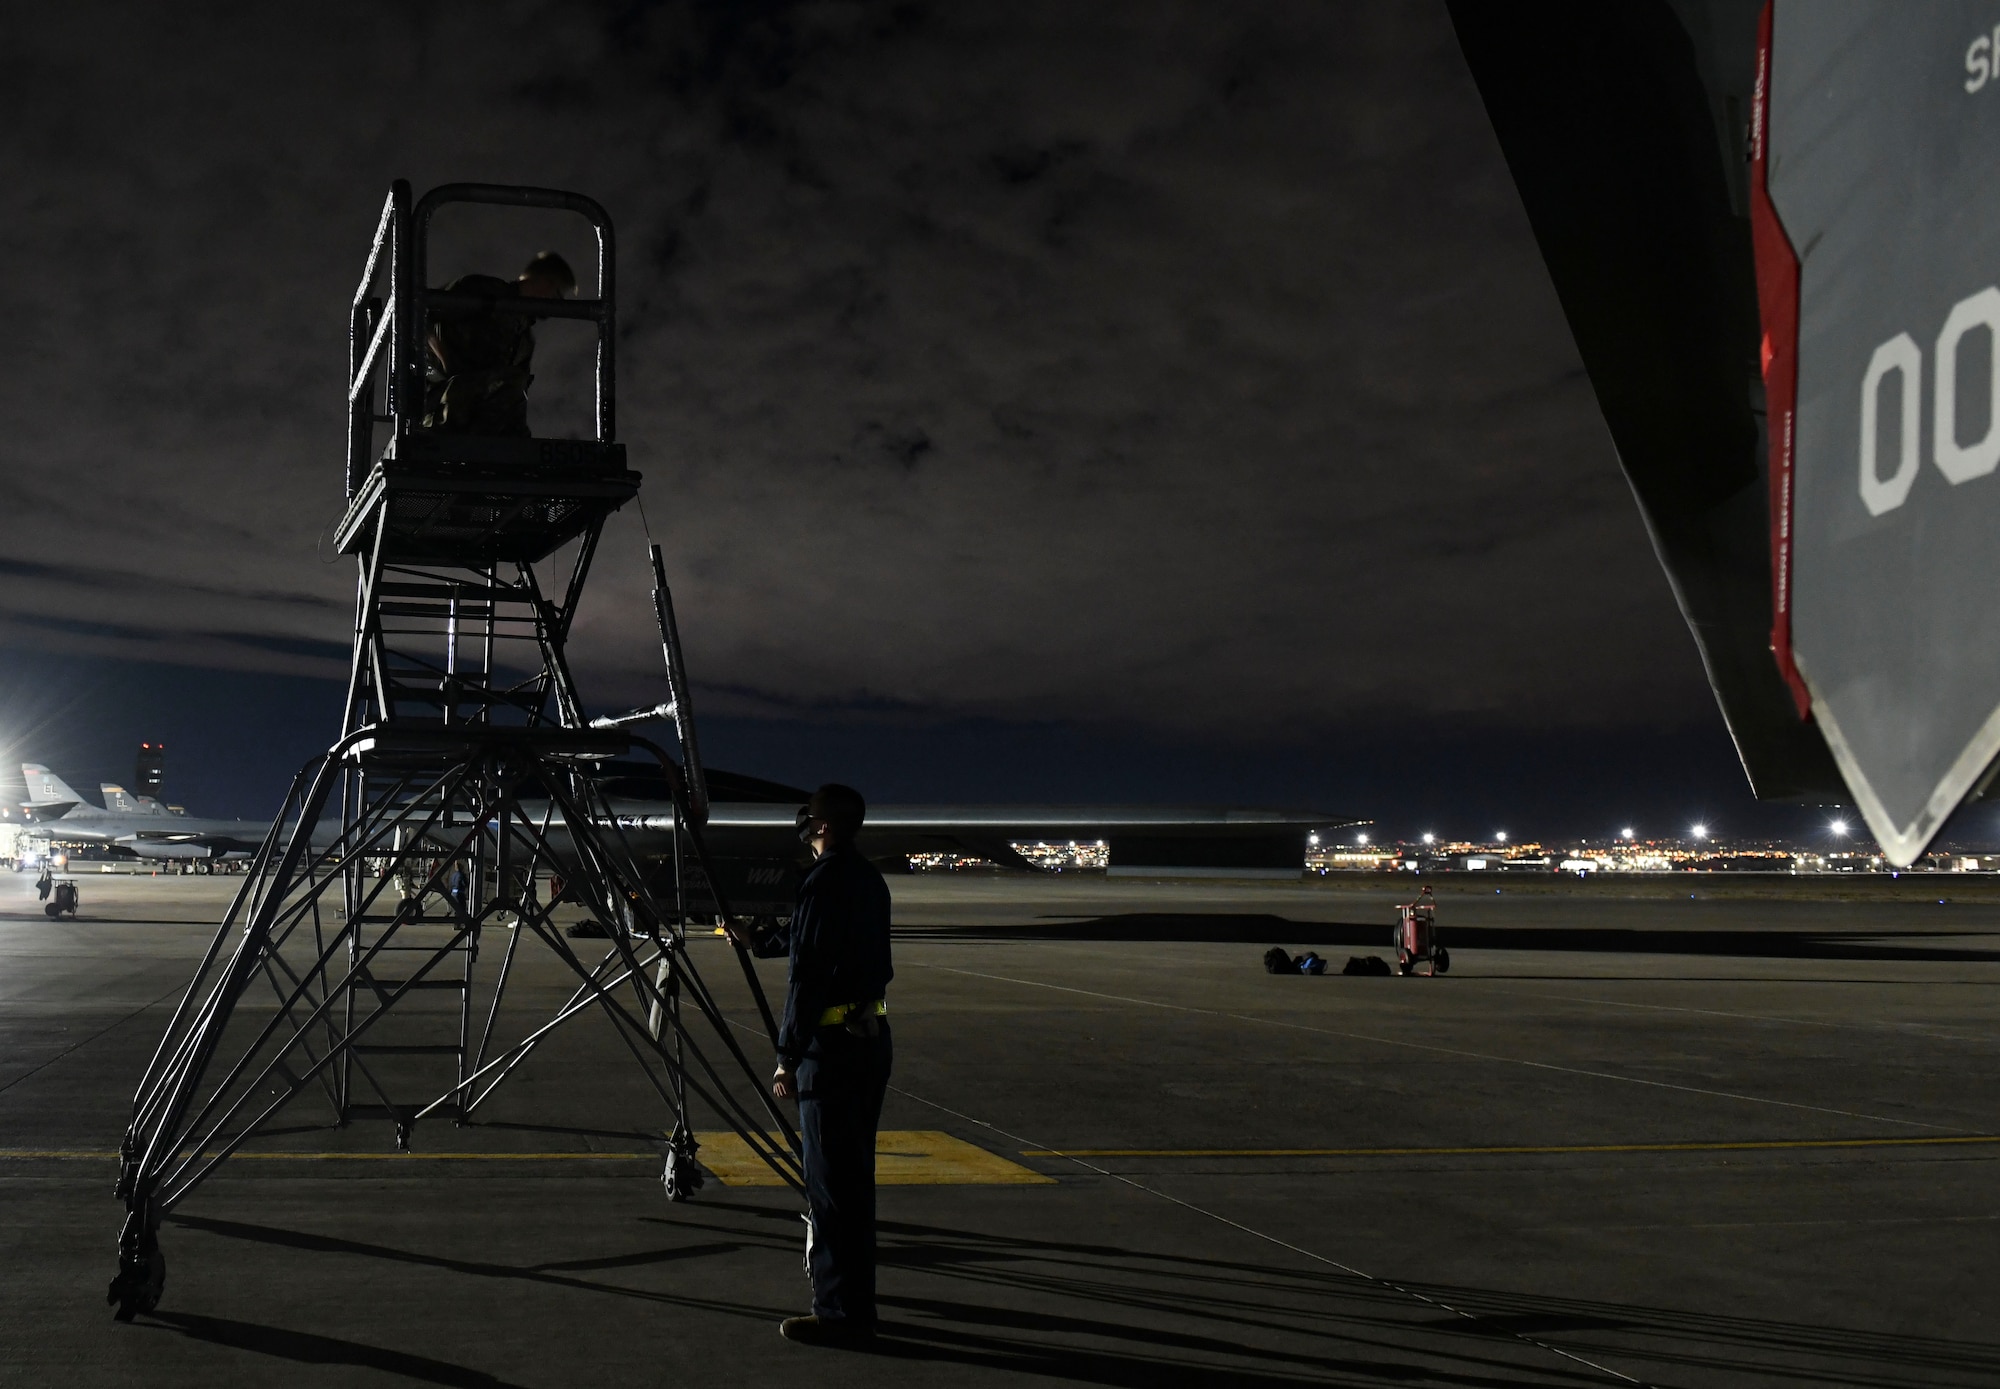 U.S. Air Force Senior Airman Matthew Anderson, left, and Staff Sgt. Sean Cadigan, both 509th Maintenance Squadron signature diagnostics technicians, setup an aircraft standing during Red Flag 21-1, at Nellis Air Force Base, Nevada, Feb. 1, 2021. Along with aircrew, approximately 100 Team Whiteman Airmen participated in the large-force exercise as the lead wing. As the lead Wing, RF 21-1 enabled Team Whiteman to maintain a high state of readiness and proficiency, while validating their always-ready global strike capability. (U.S. Air Force photo by Staff Sgt. Sadie Colbert)